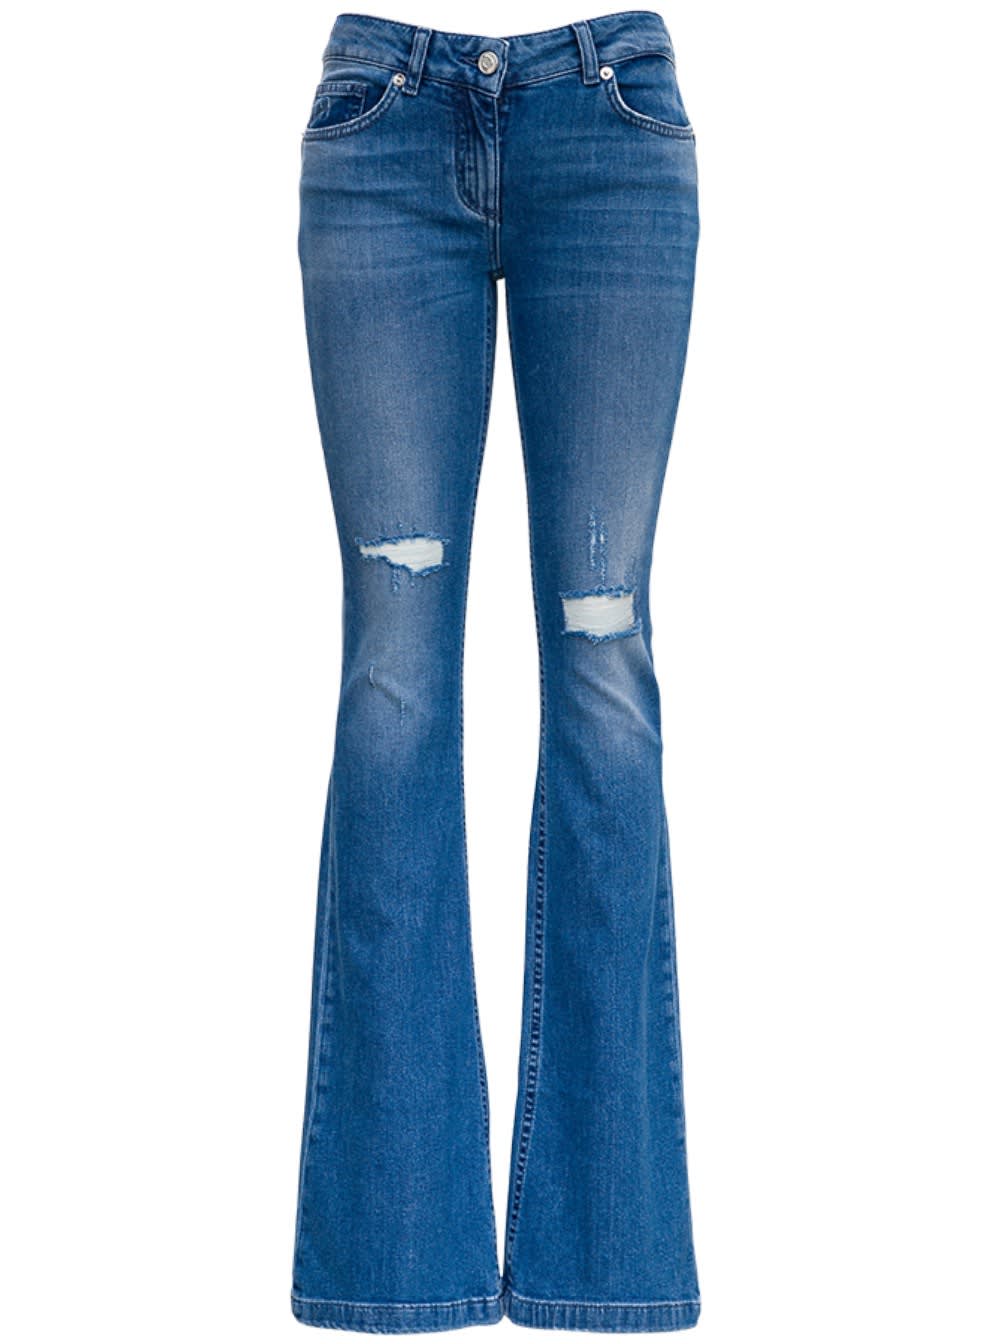 BLUMARINE FLARED JEANS WITH RIPS DETAIL,11793892